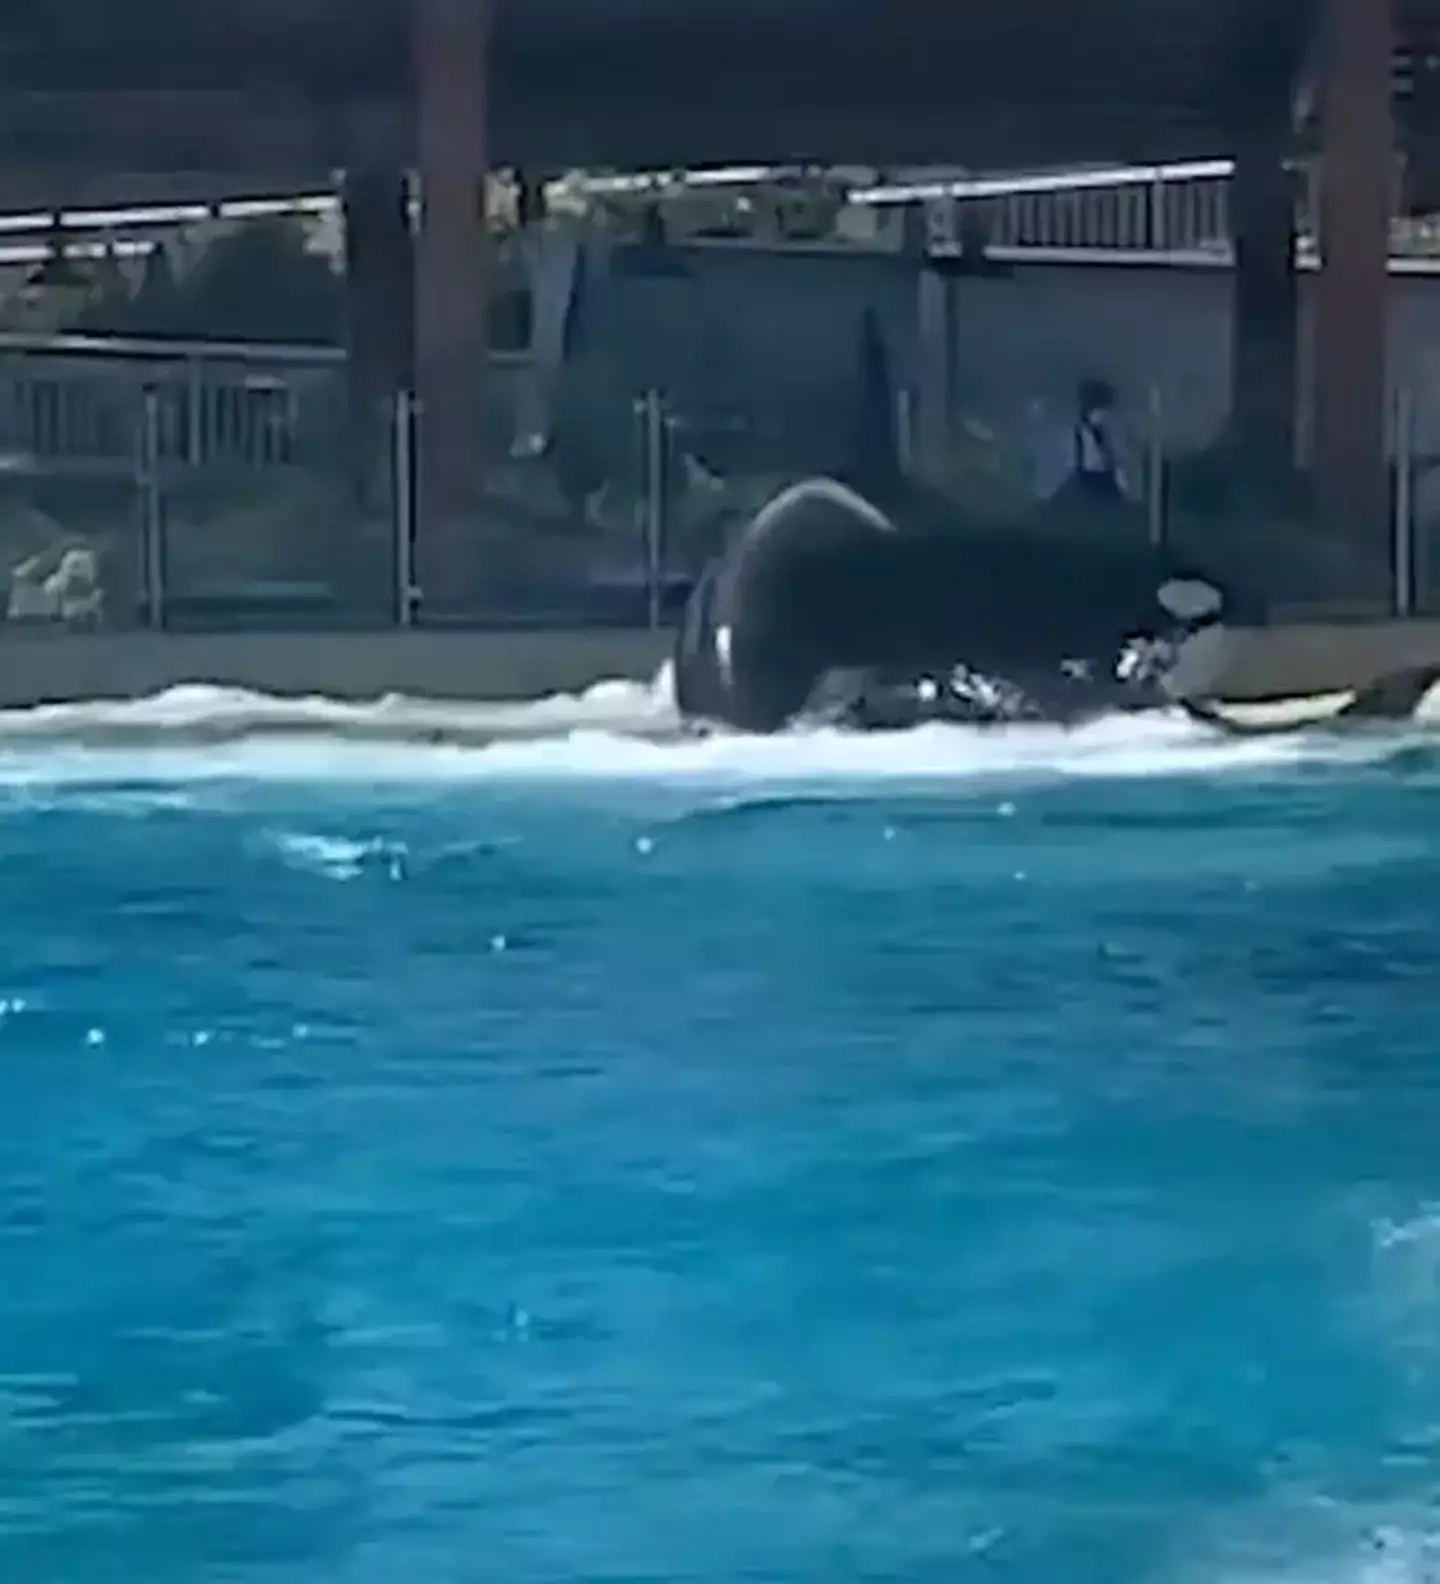 SeaWorld visitors were shocked to sea orcas fighting.